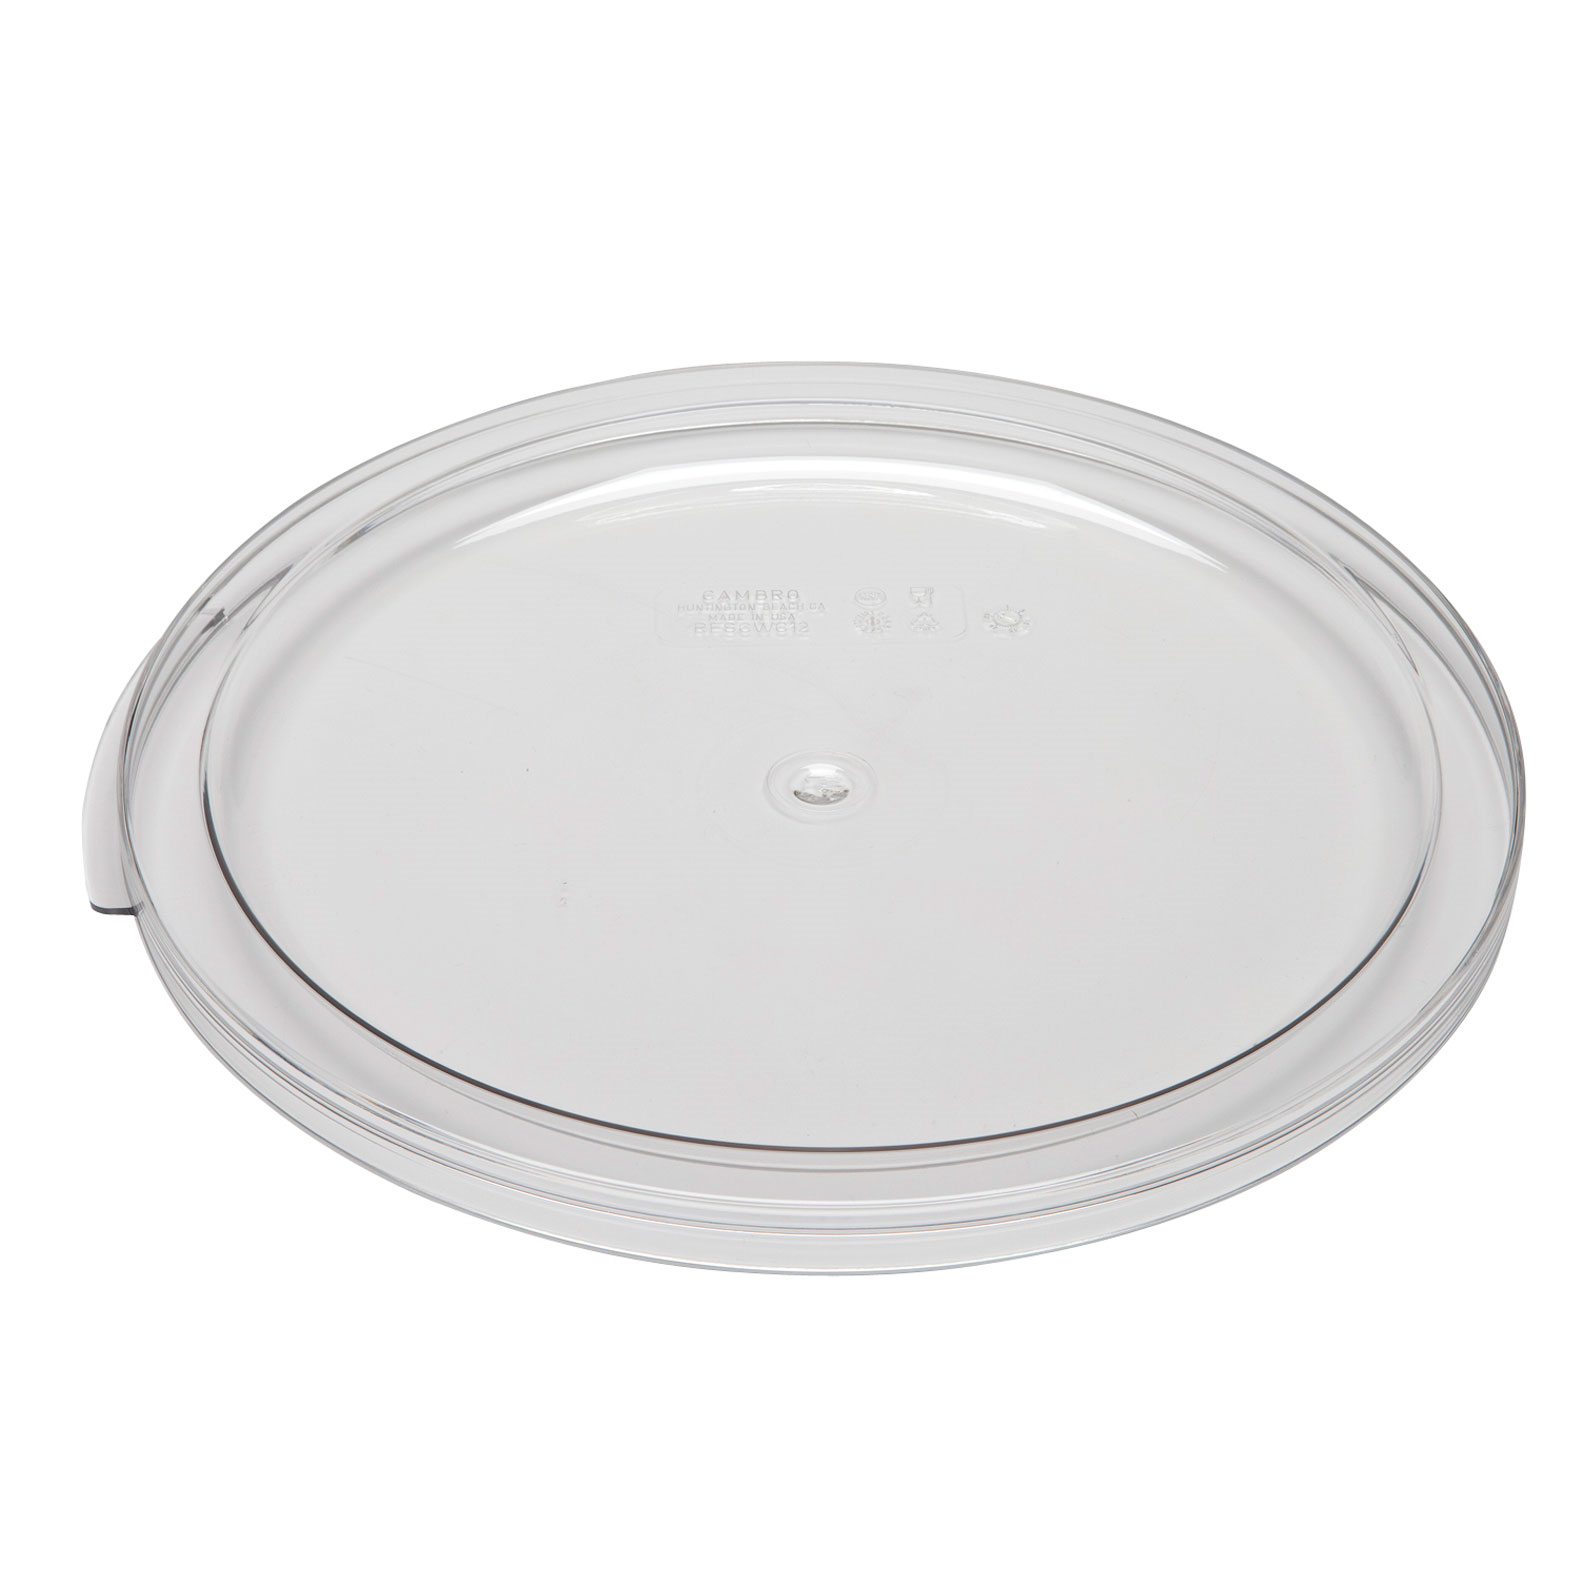 1 QT CLEAR LID FOR ROUND FOOD STORAGE CONTAINER, EACH 4/22